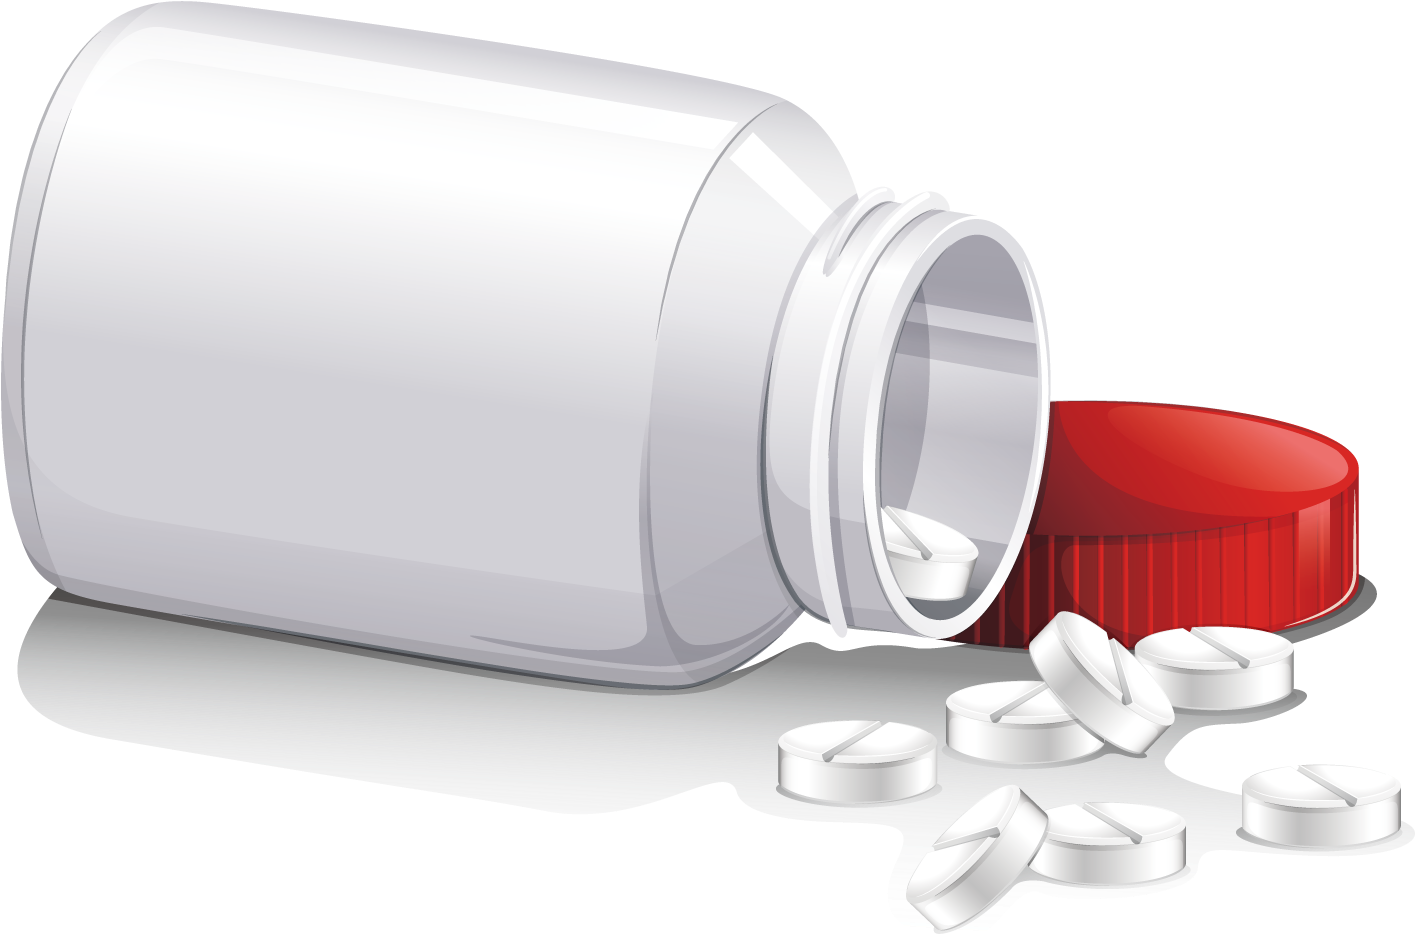 Spilled Pill Bottle Graphic PNG image